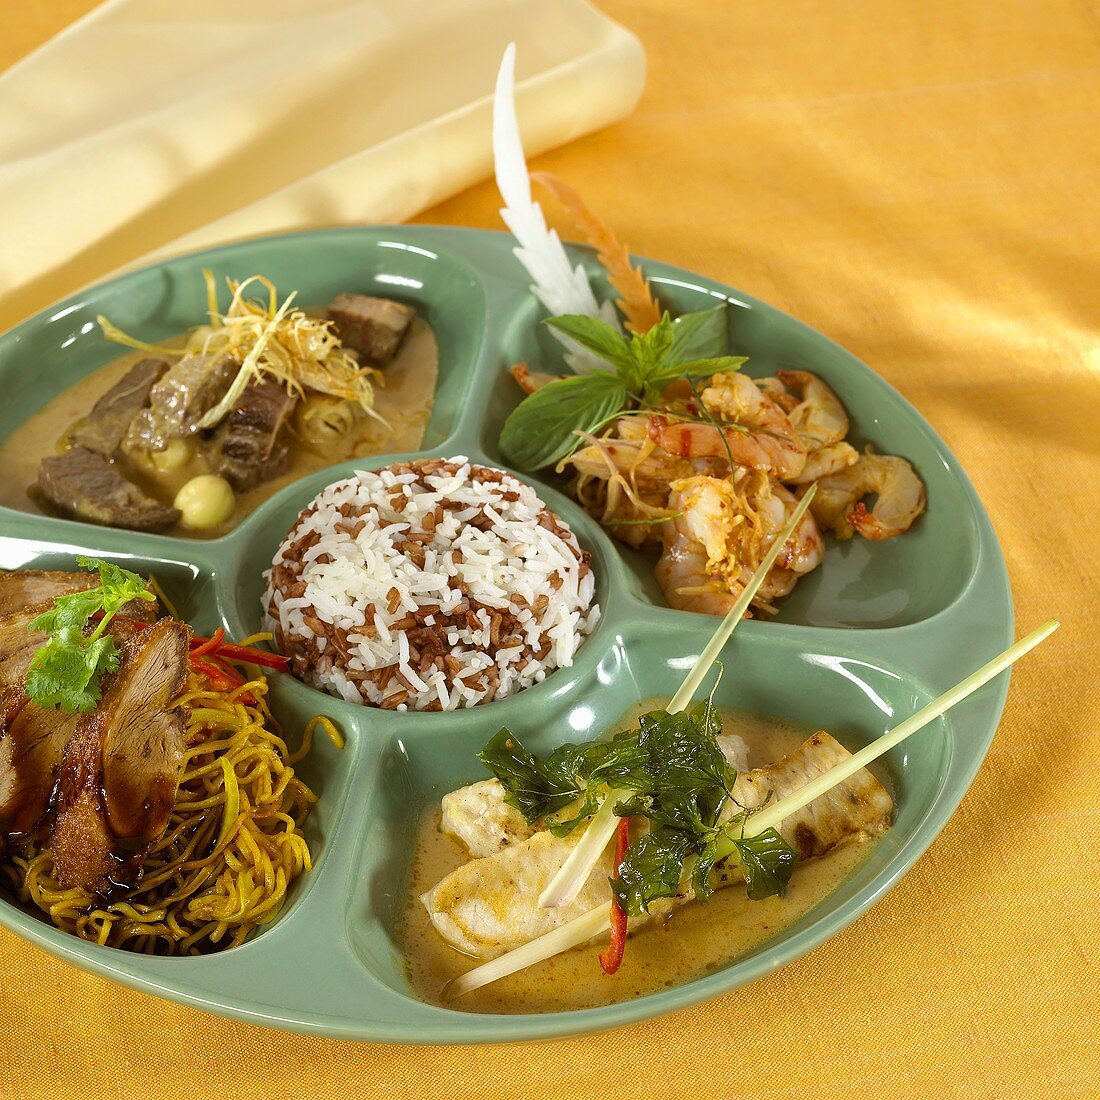 Plate of different Asian dishes (Thailand)